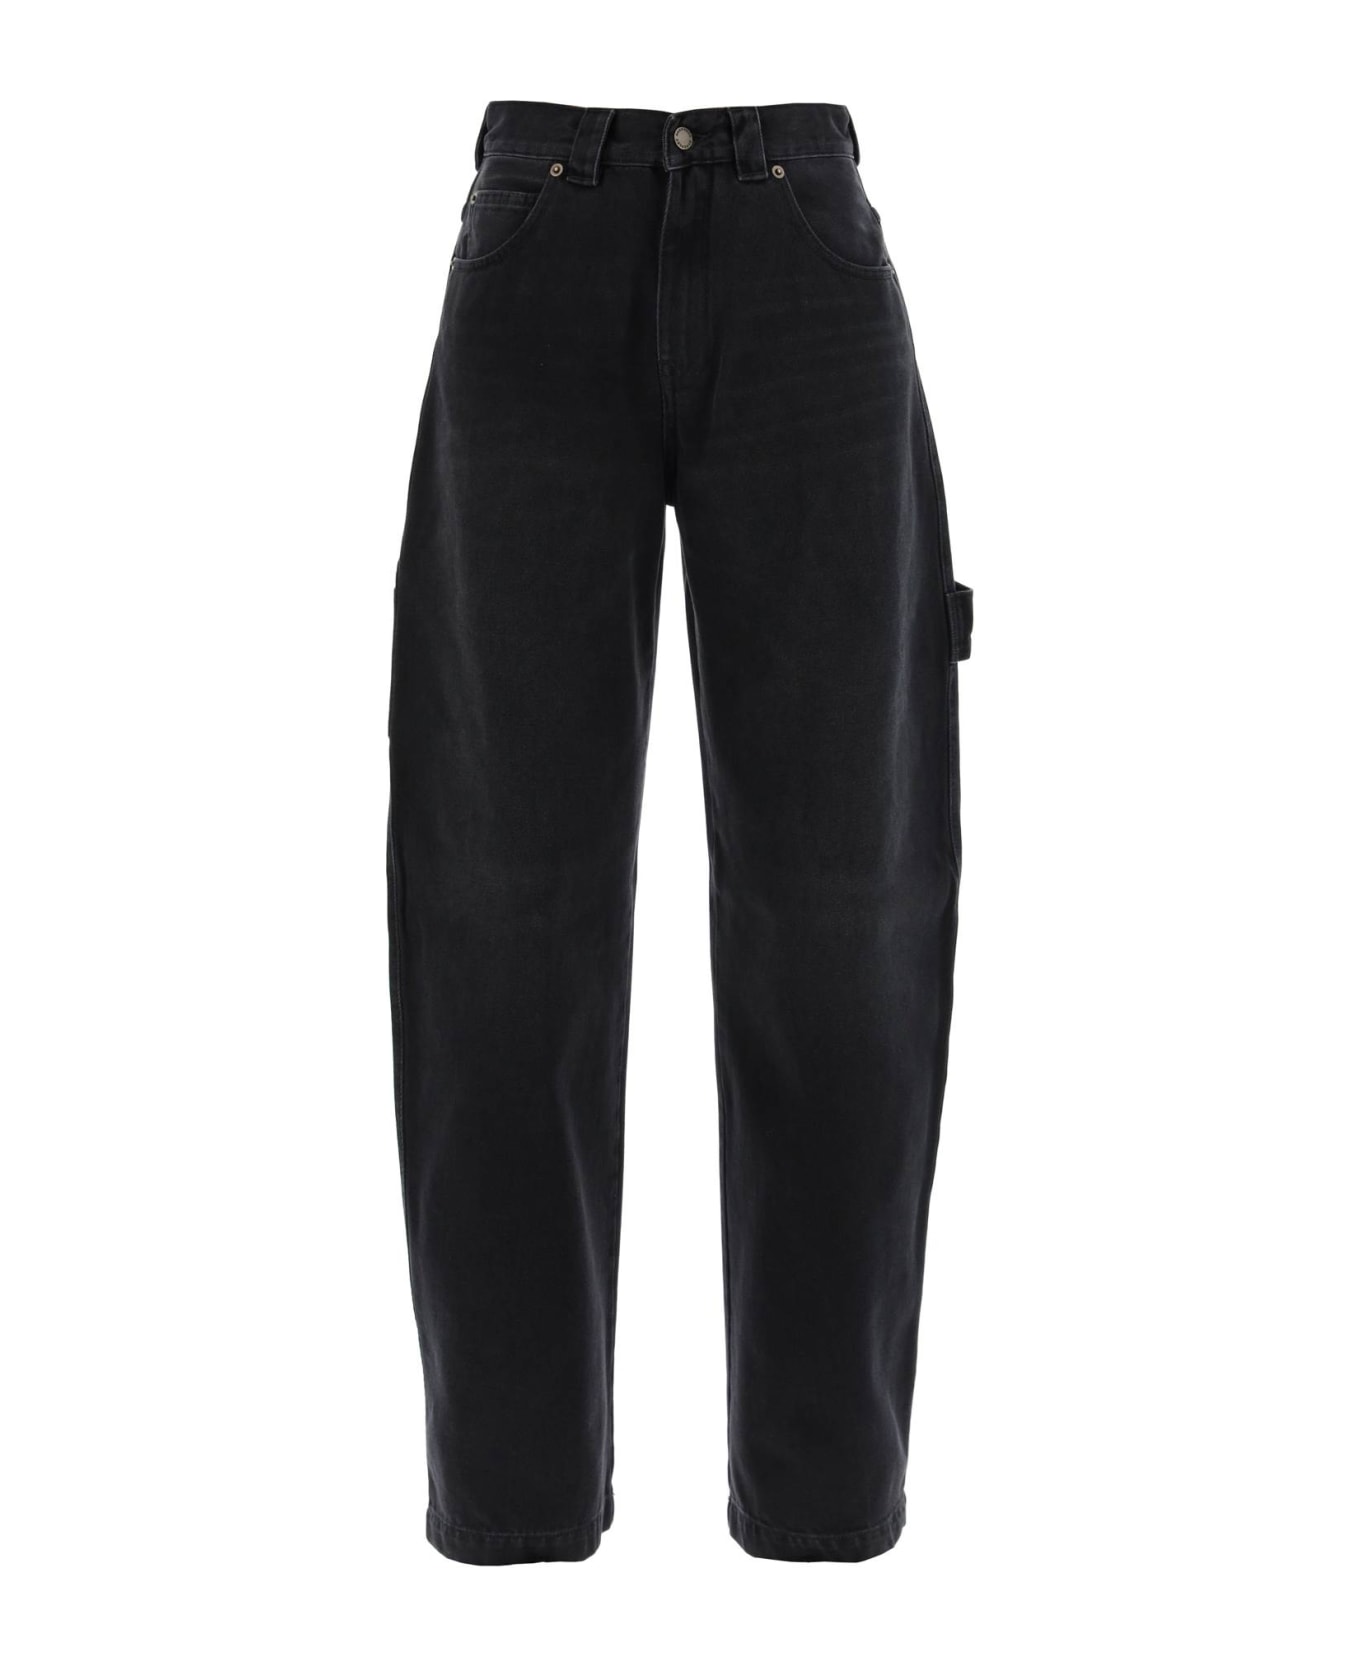 DARKPARK Audrey Cargo Jeans With Curved Leg - WASHED BLACK (Black)